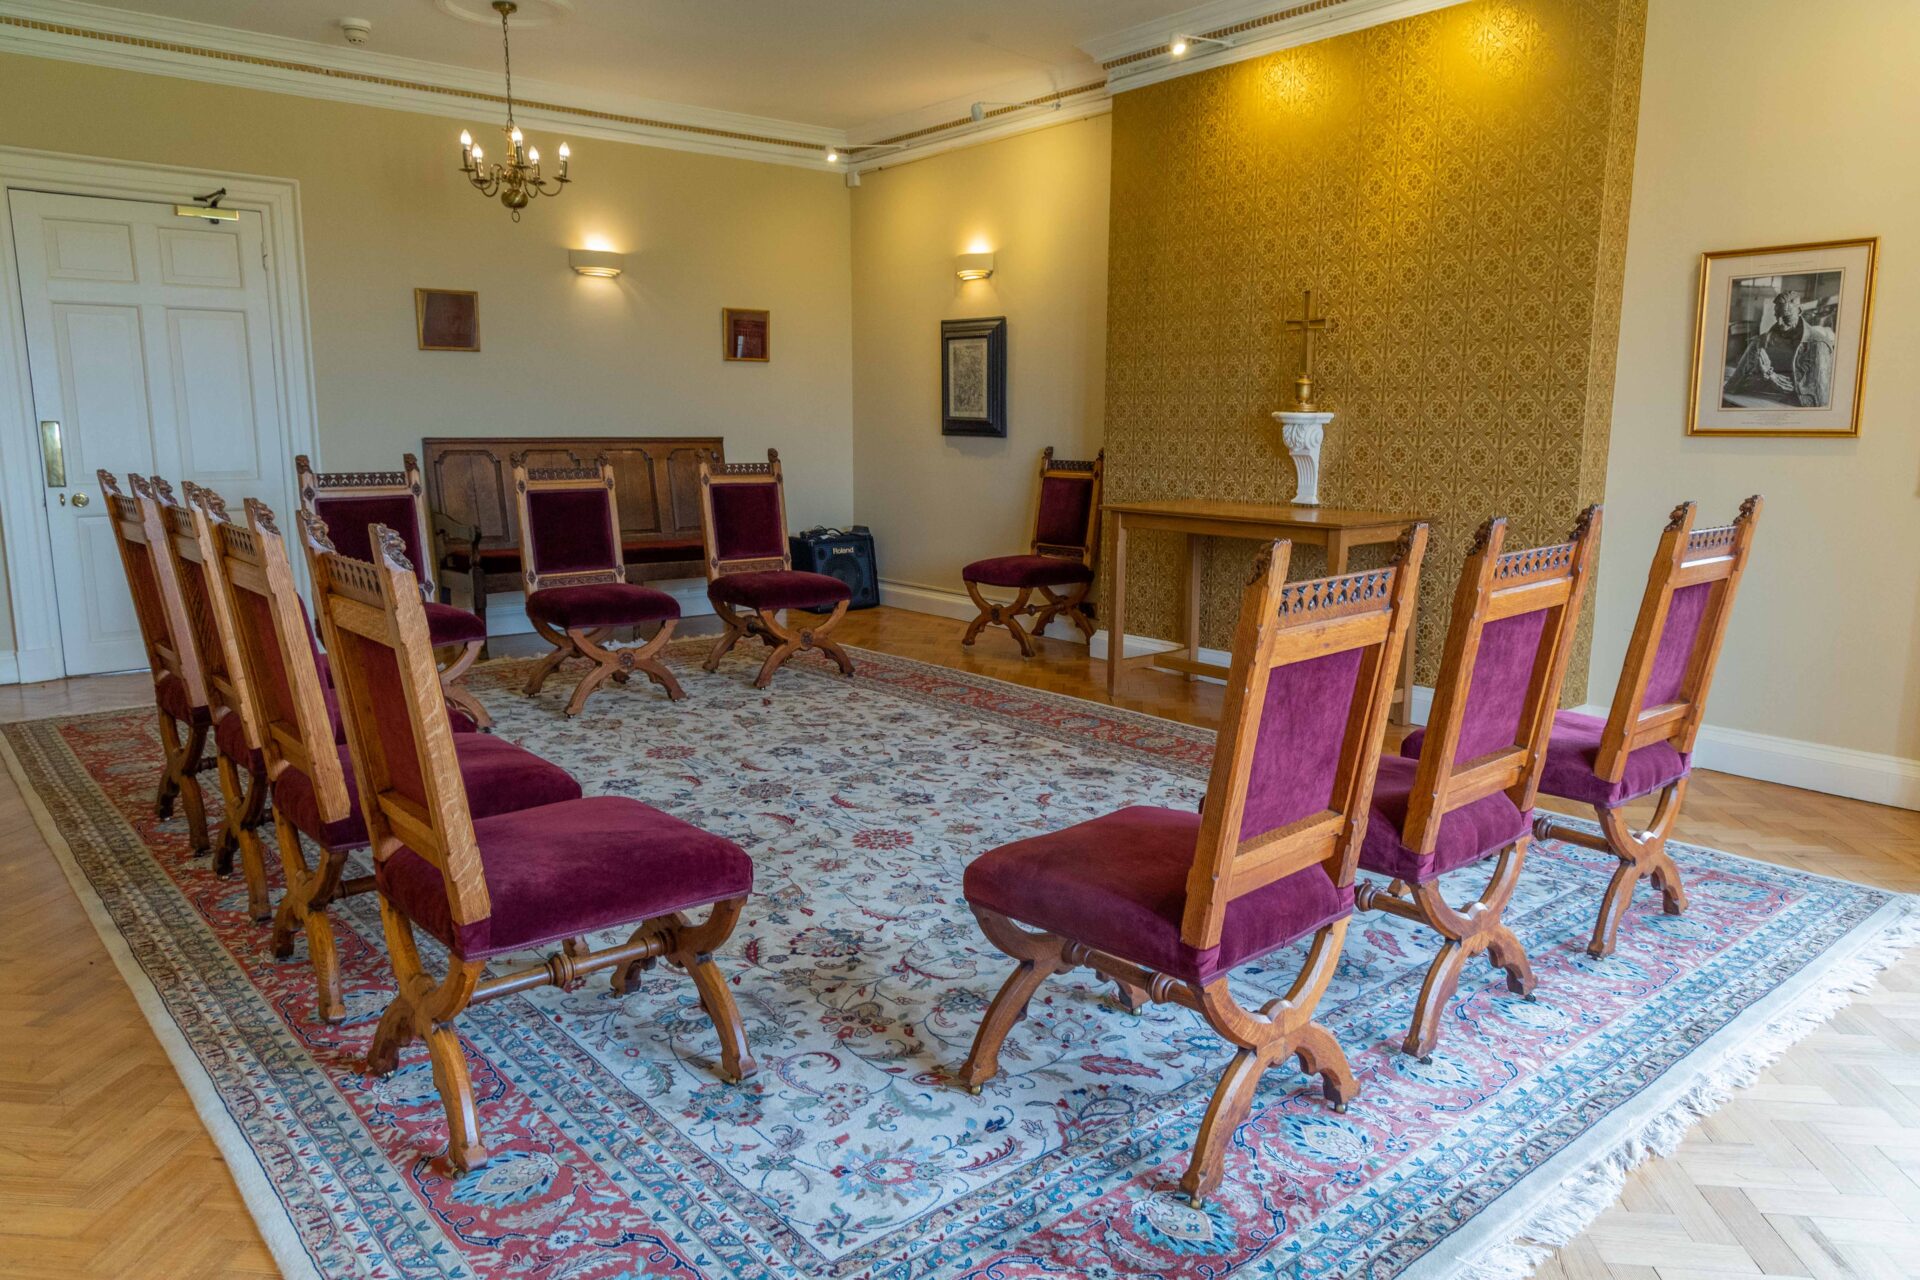 The Cumberland Lodge chapel, seating 10 in a round